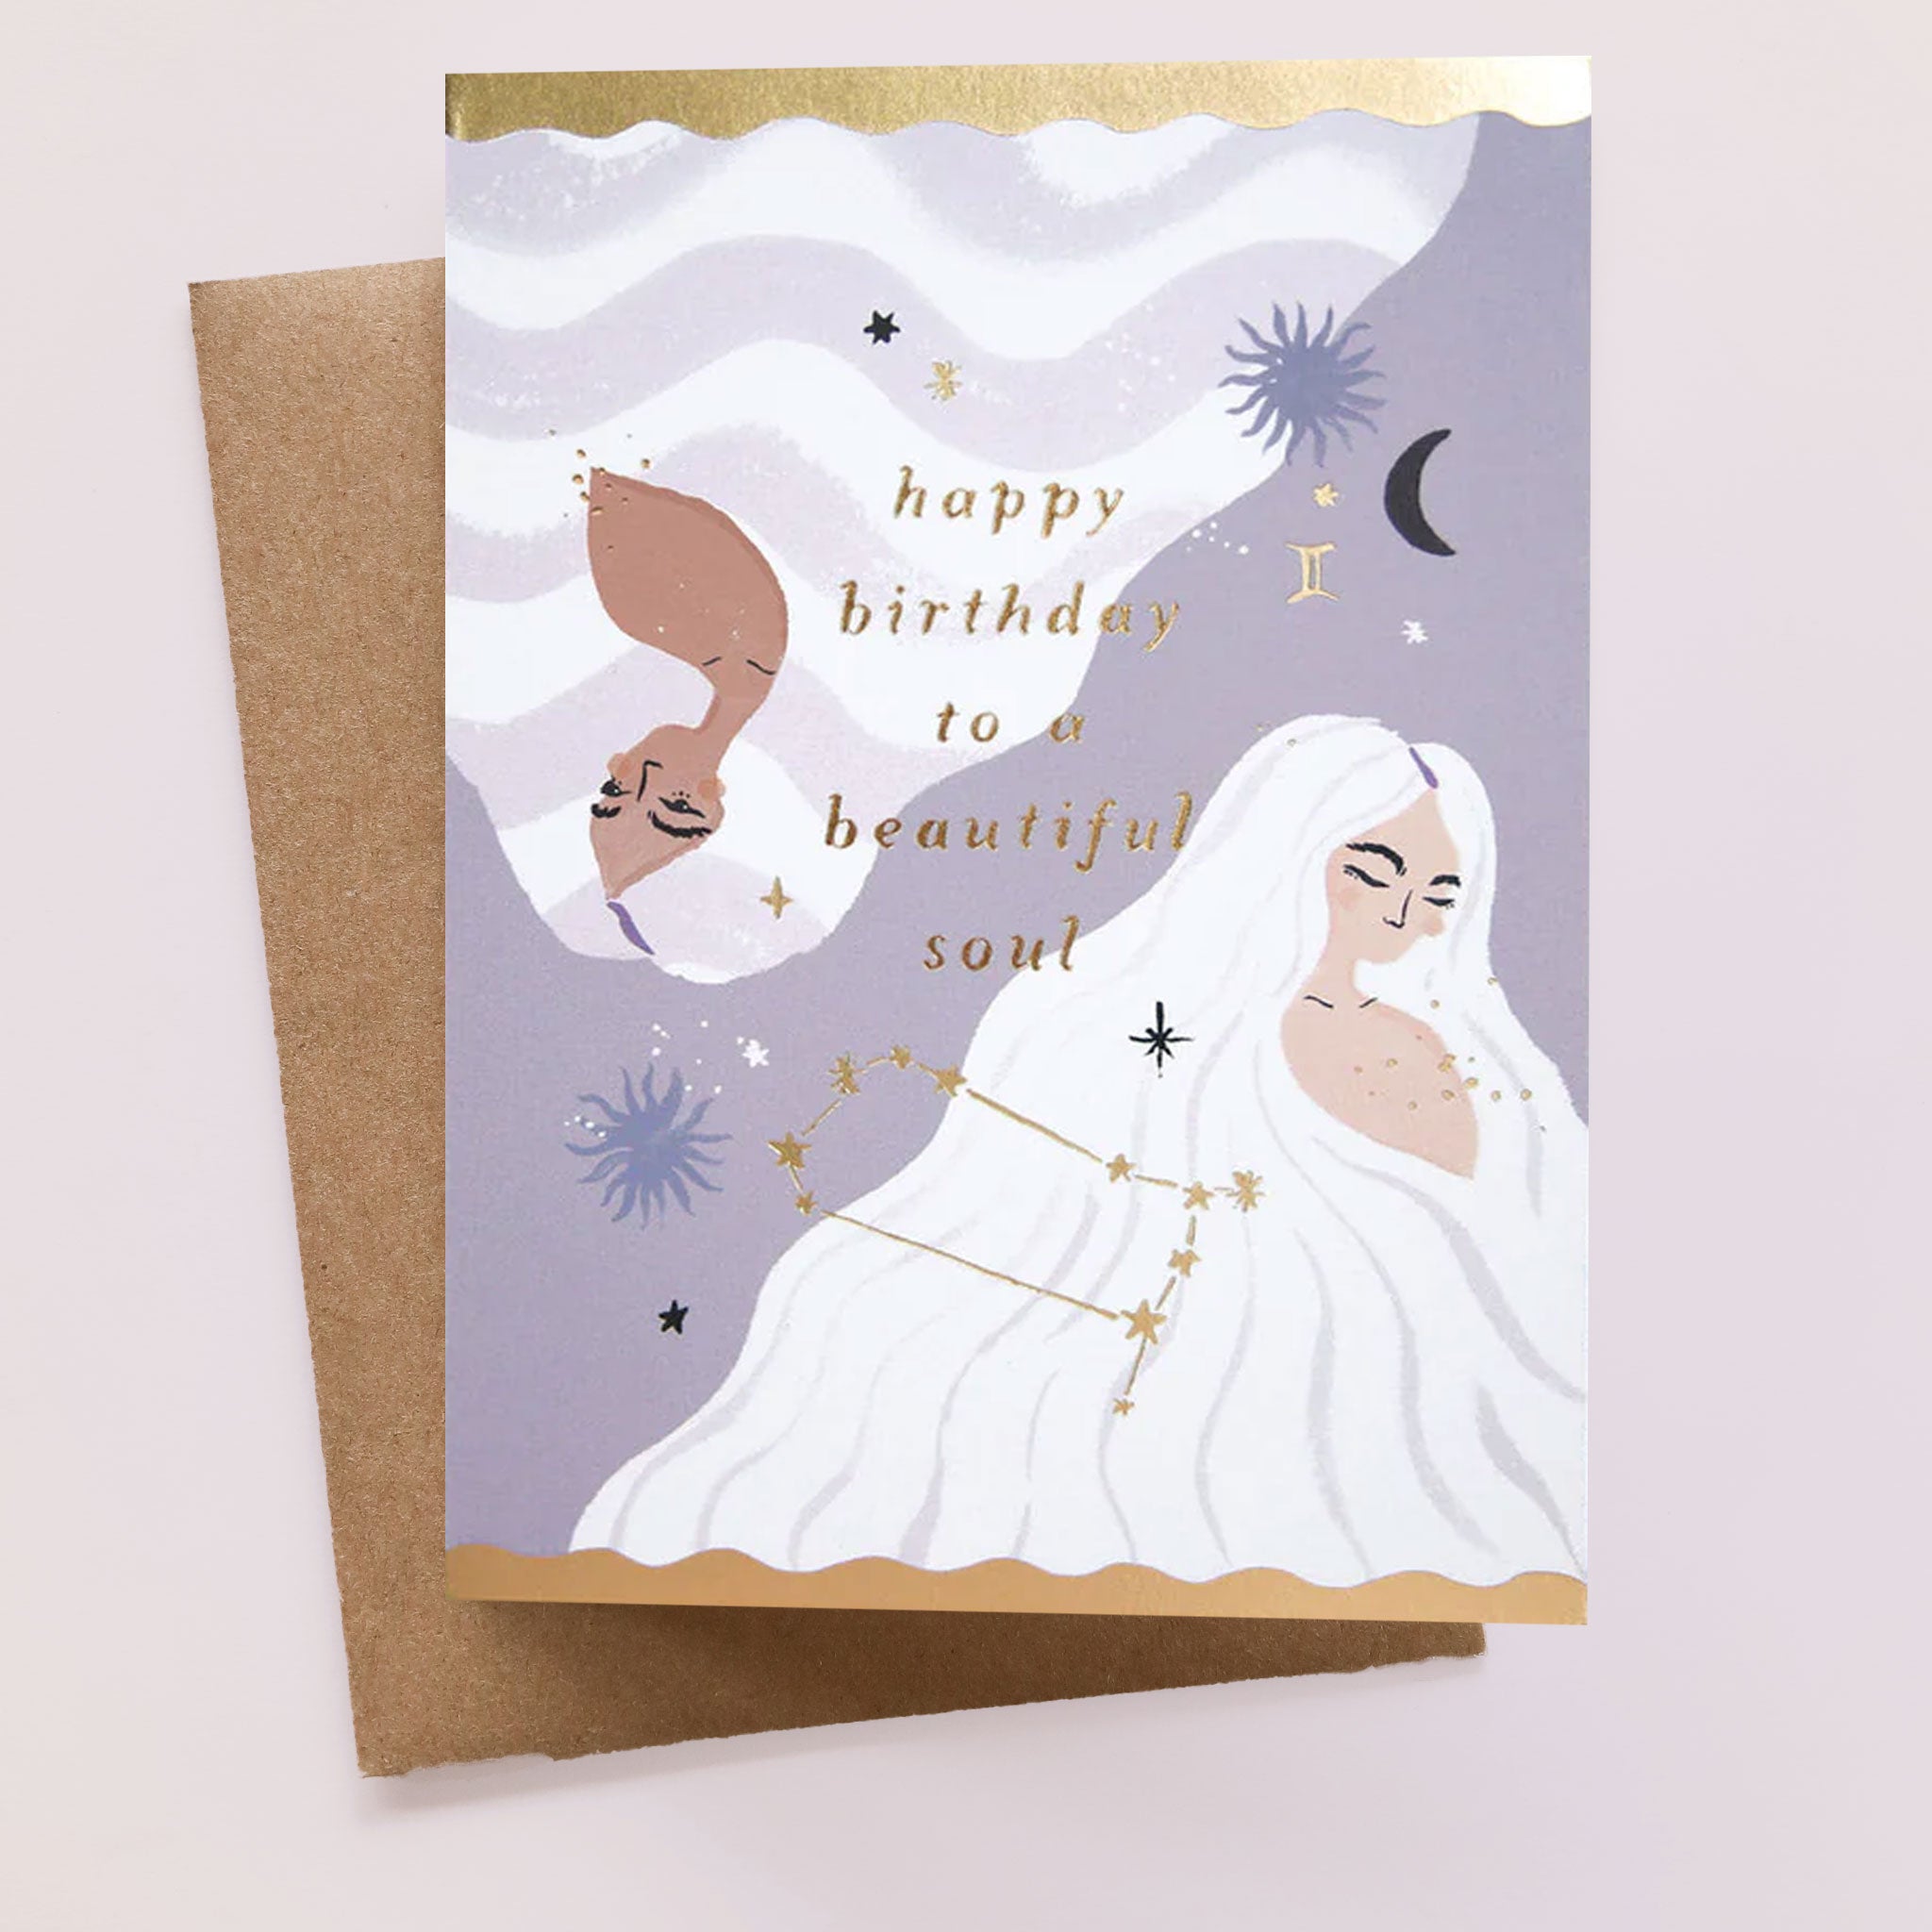 On a neutral background is a card with a woman on the front and gold text that reads, &quot;happy birthday to a beautiful soul&quot; along with star and moon illustrations. 